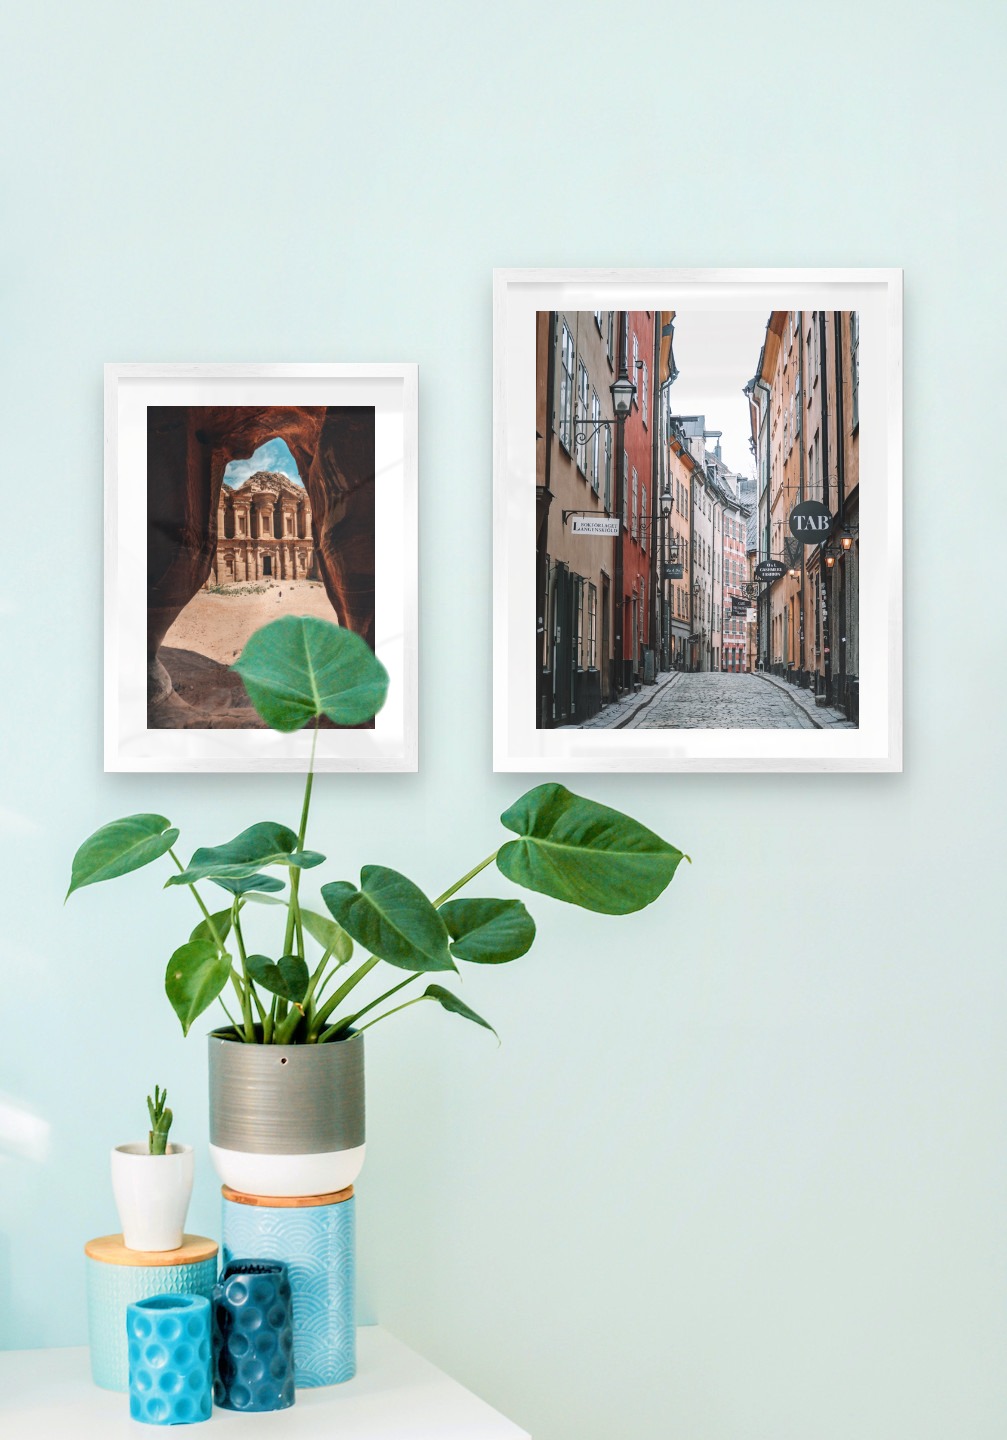 Gallery wall with picture frames in silver in sizes 30x40 and 40x50 with prints "Petra in Jordan" and "Old town in Stockholm"